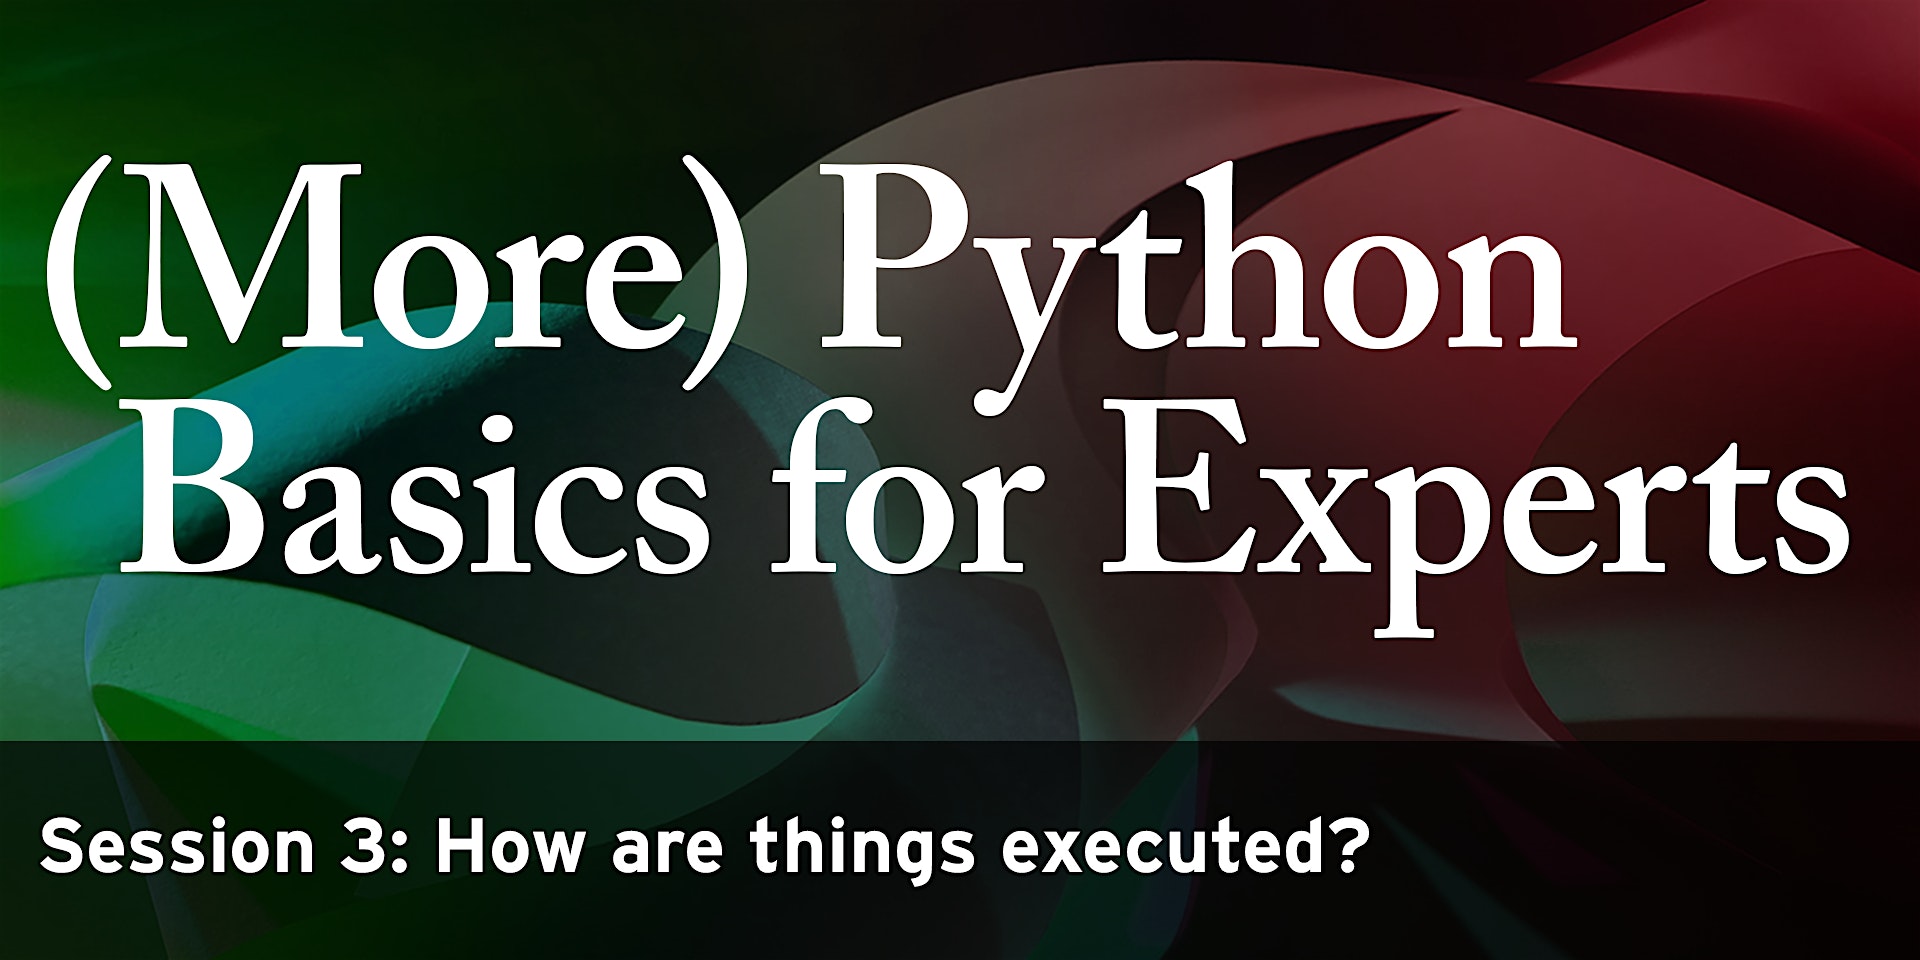 FRI, AUG 19, 2022 - (More) Python Basics for Experts III - How are things executed?